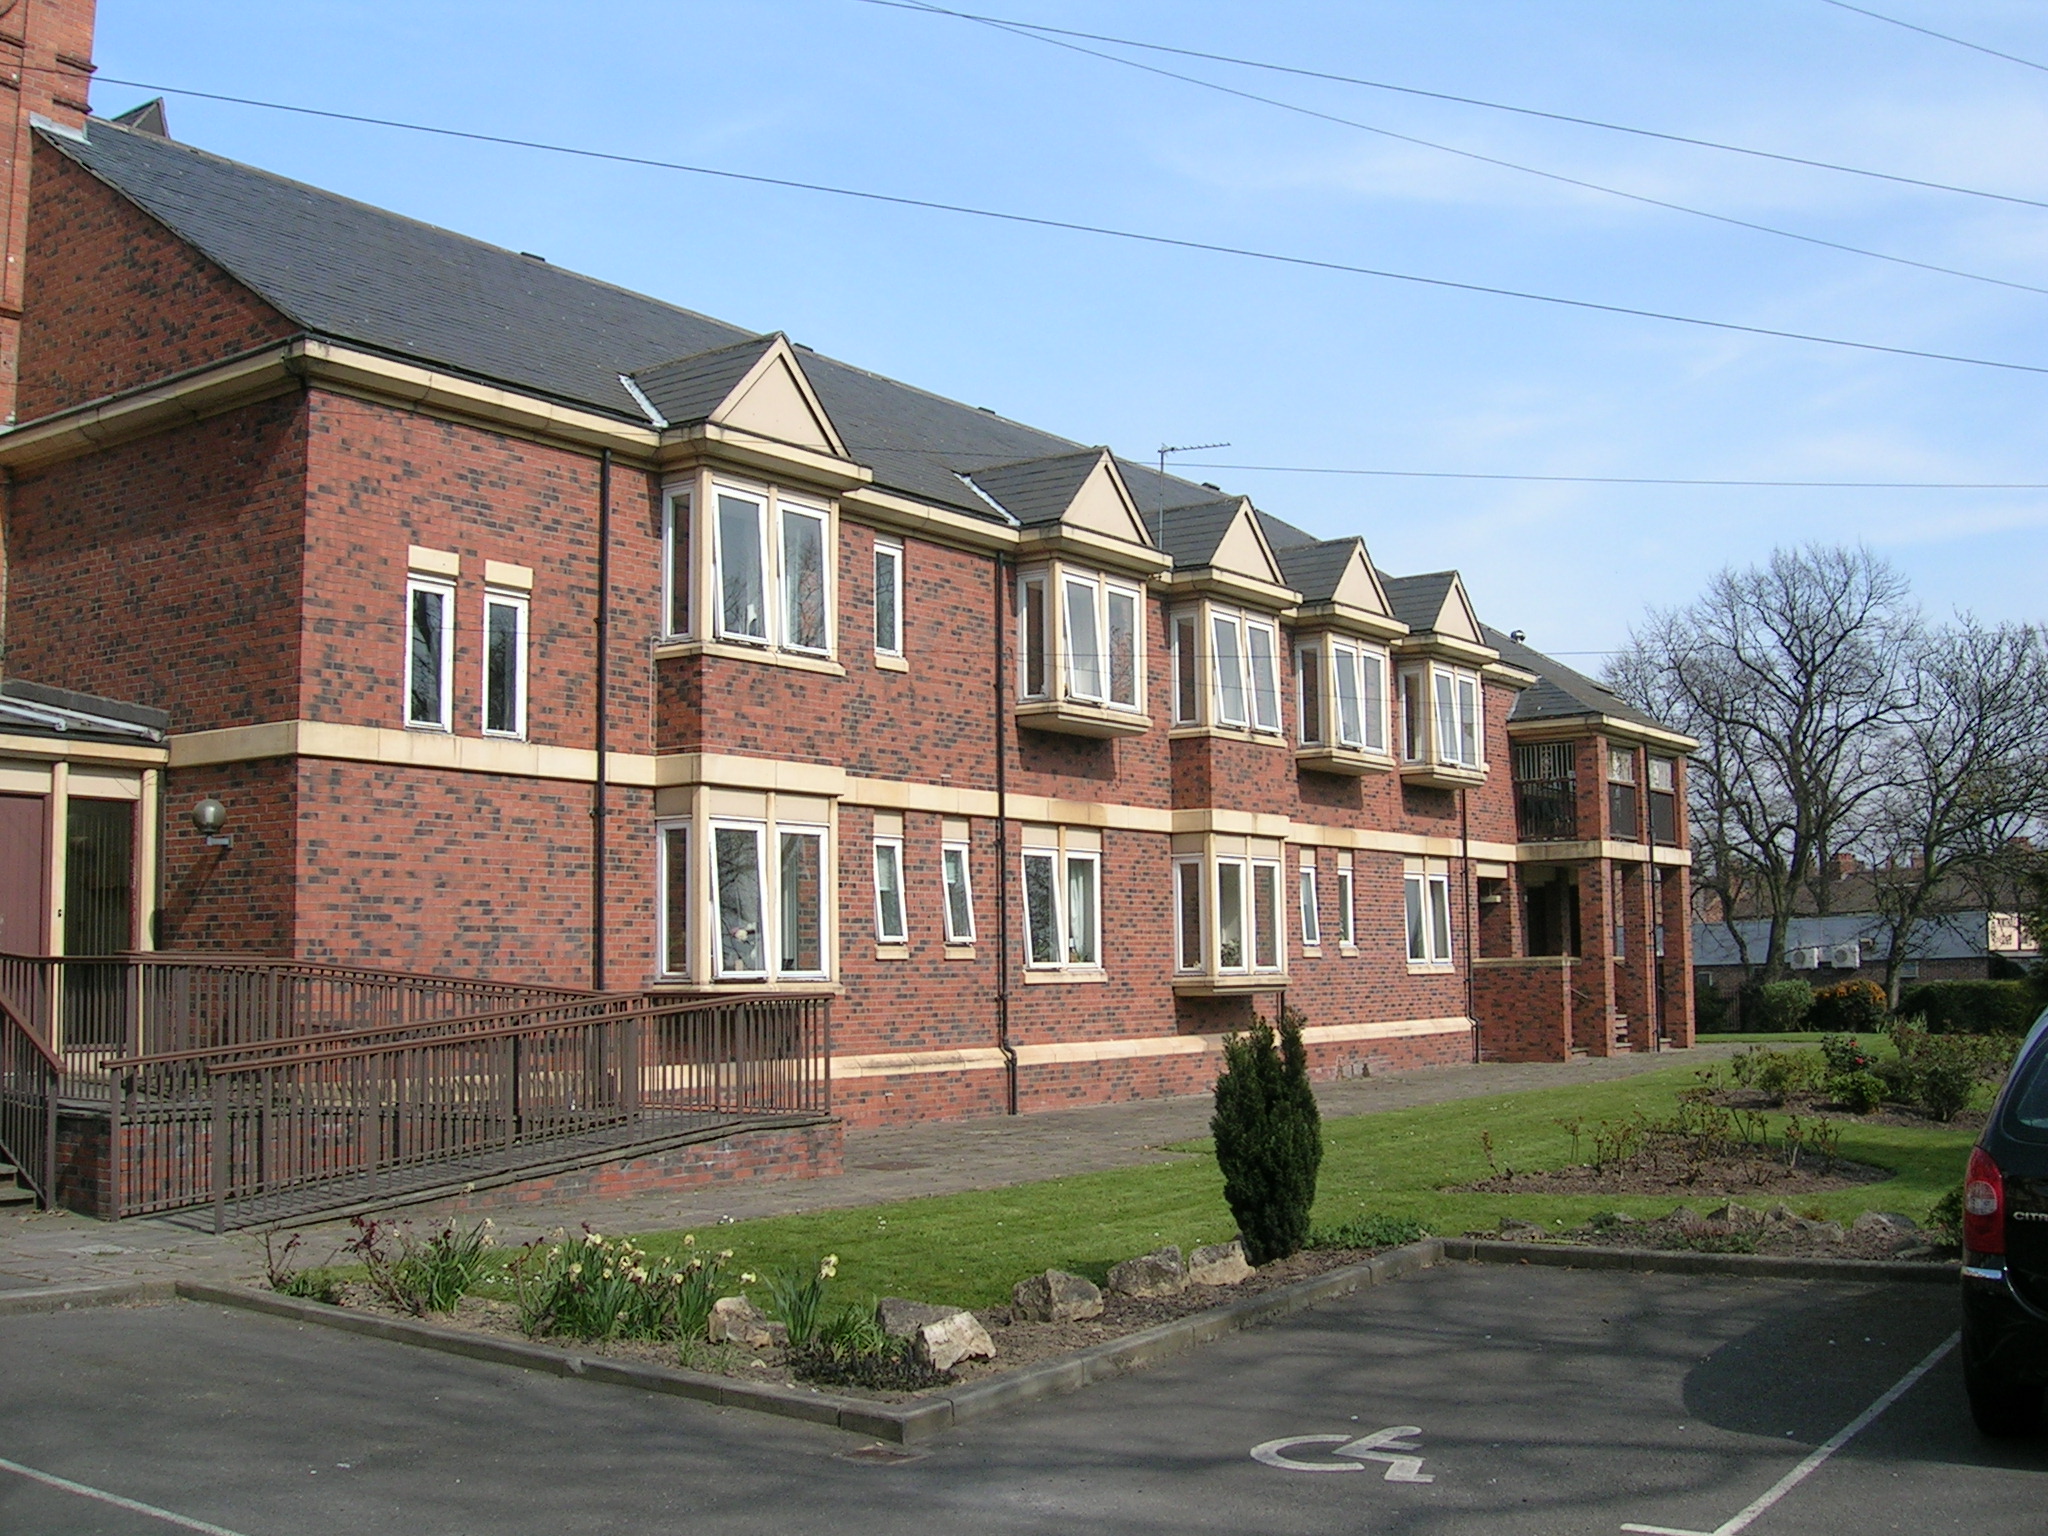 Regent House (part of Victoria House Care Centre): Key Healthcare is dedicated to caring for elderly residents in safe. We have multiple dementia care homes including our care home middlesbrough, our care home St. Helen and care home saltburn. We excel in monitoring and improving care levels.